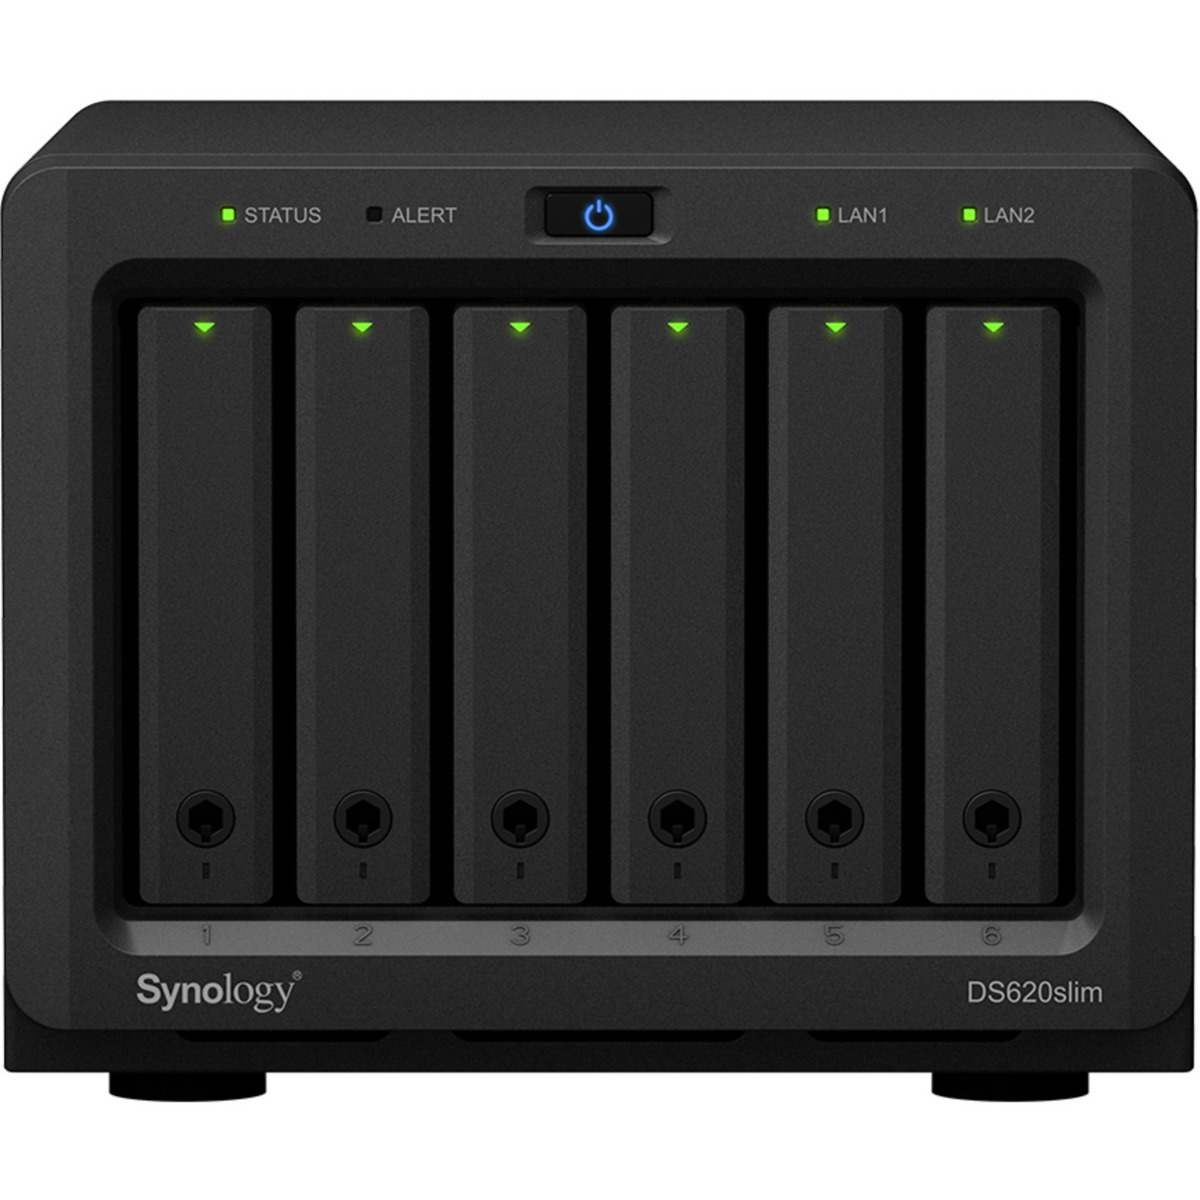 Synology DiskStation DS620slim 2.4tb 6-Bay Desktop Multimedia / Power User / Business NAS - Network Attached Storage Device 5x480gb Synology SAT5210 Series SAT5210-480G 2.5 530/500MB/s SATA 6Gb/s SSD ENTERPRISE Class Drives Installed - Burn-In Tested - FREE RAM UPGRADE DiskStation DS620slim